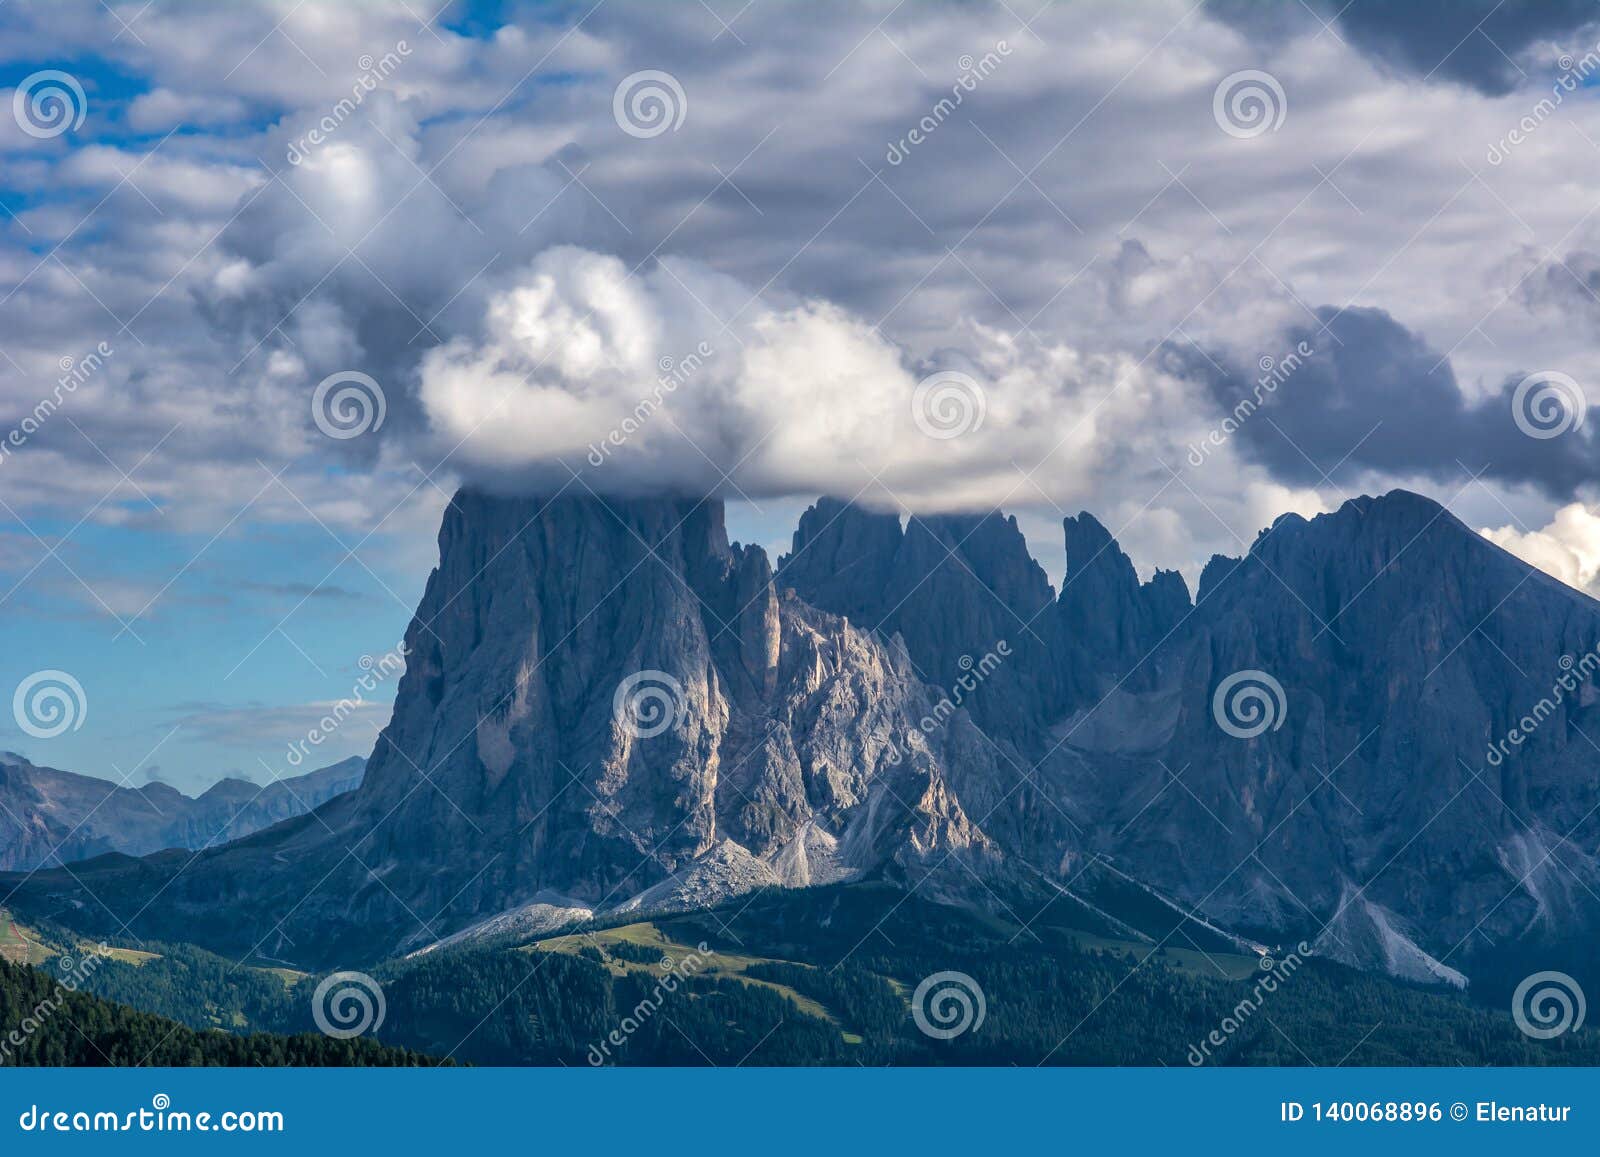 amazing view of langkofel mountain sassolungo with dramatic sky. wonderful landscape of the dolomites alps. south tyrol,